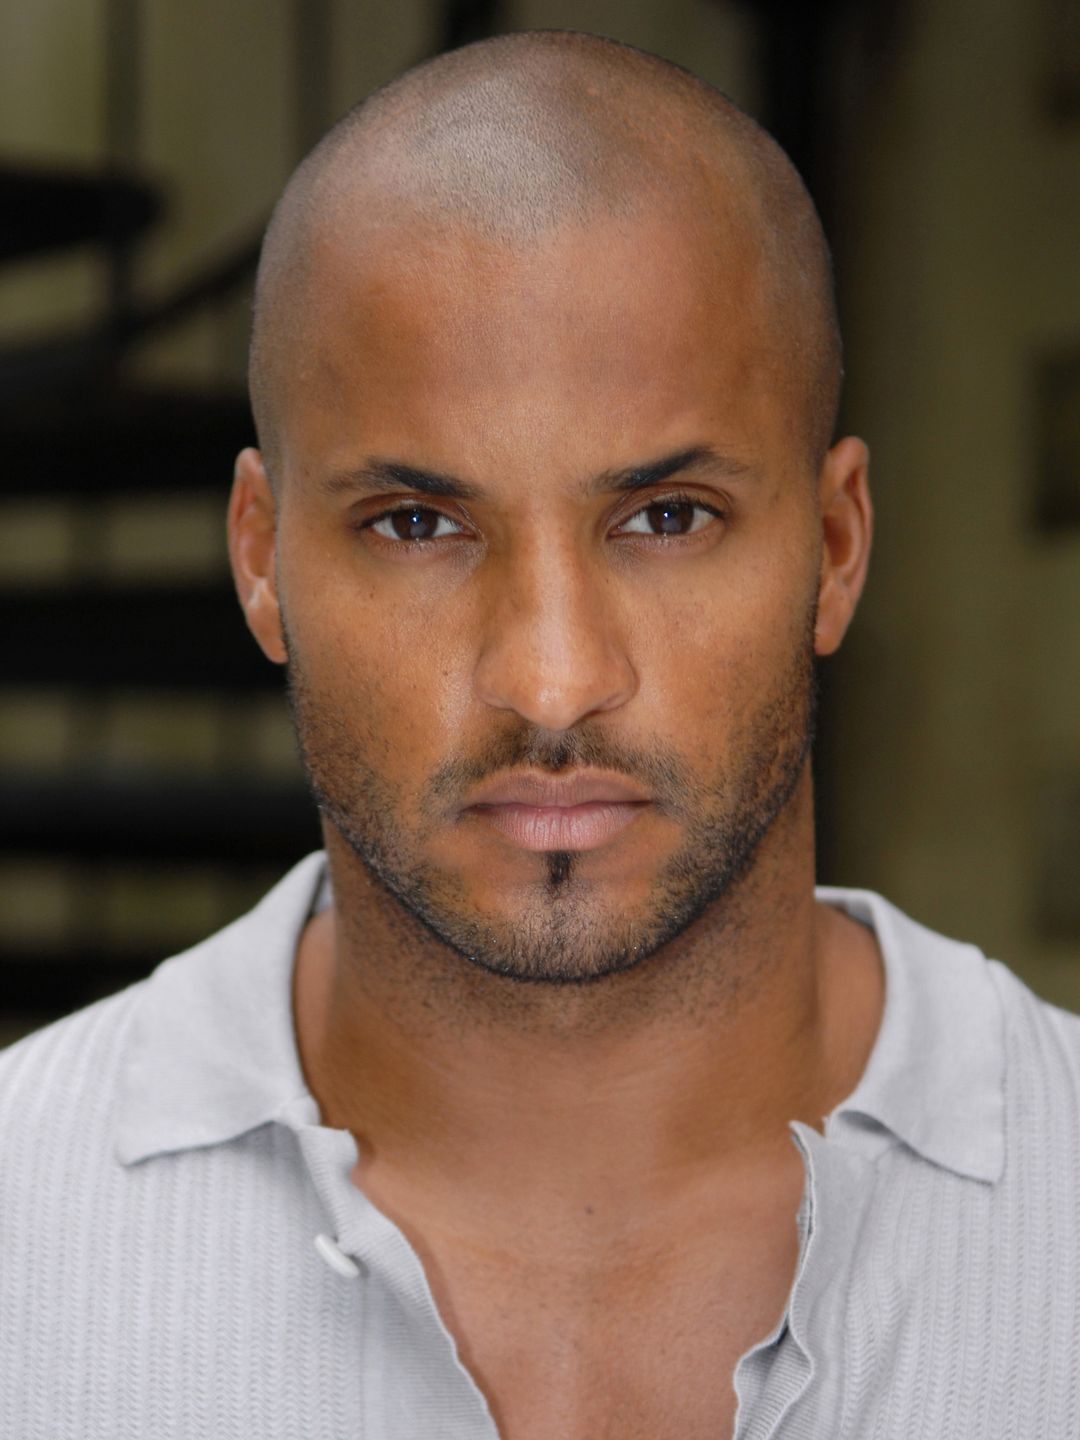 Ricky Whittle who is his father